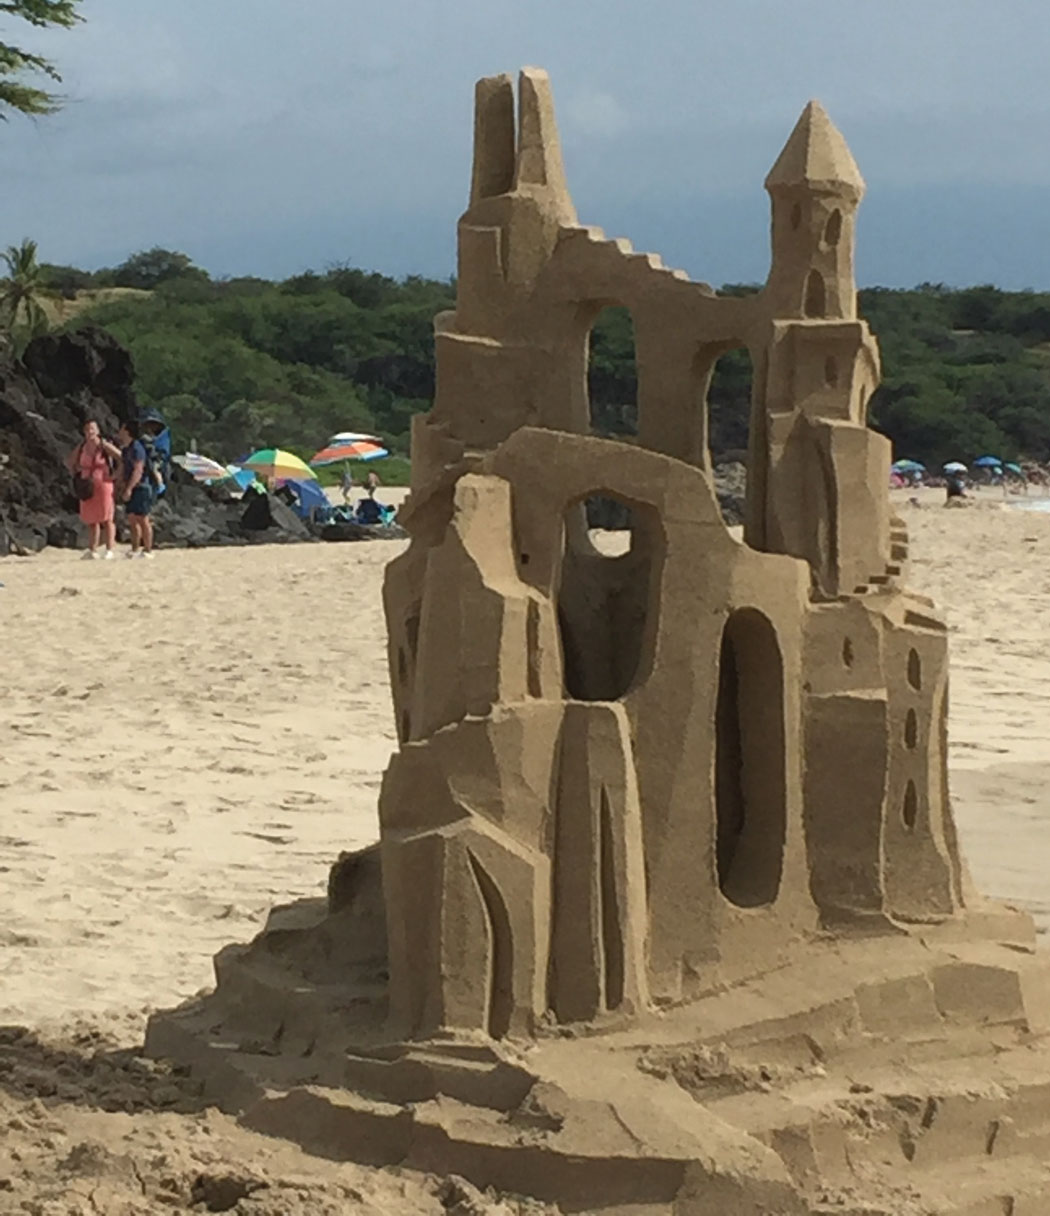 Mike Radtke’s intricate sandcastles require hours of hauling water and sand to lay the foundation. photo courtesy of Mike and Nancy Radtke